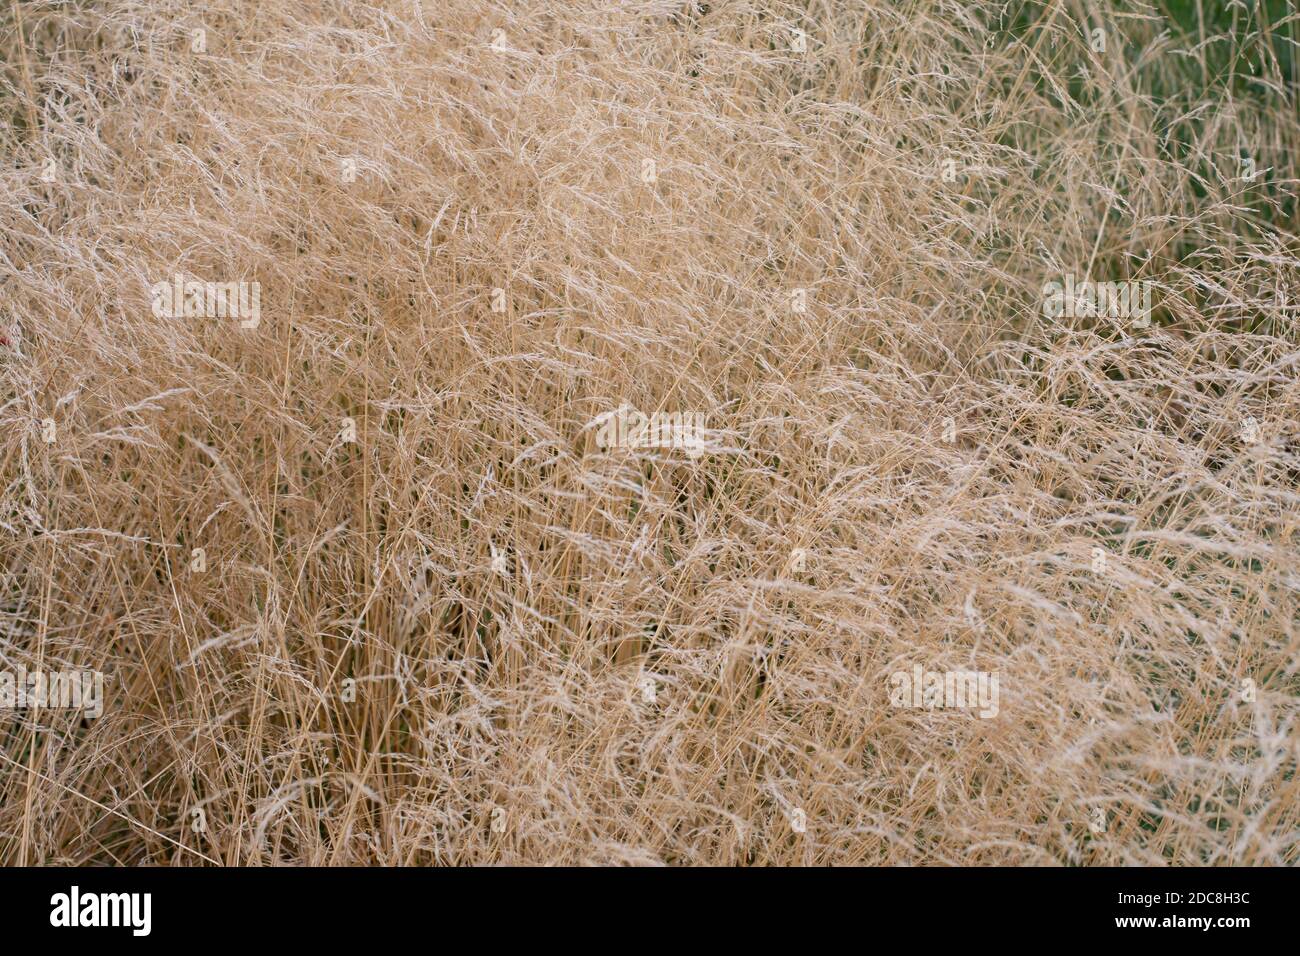 Deschampsia cespitosa close-up, dry stems of wild bluegrass. Natural background delicate herbaceous plant Stock Photo